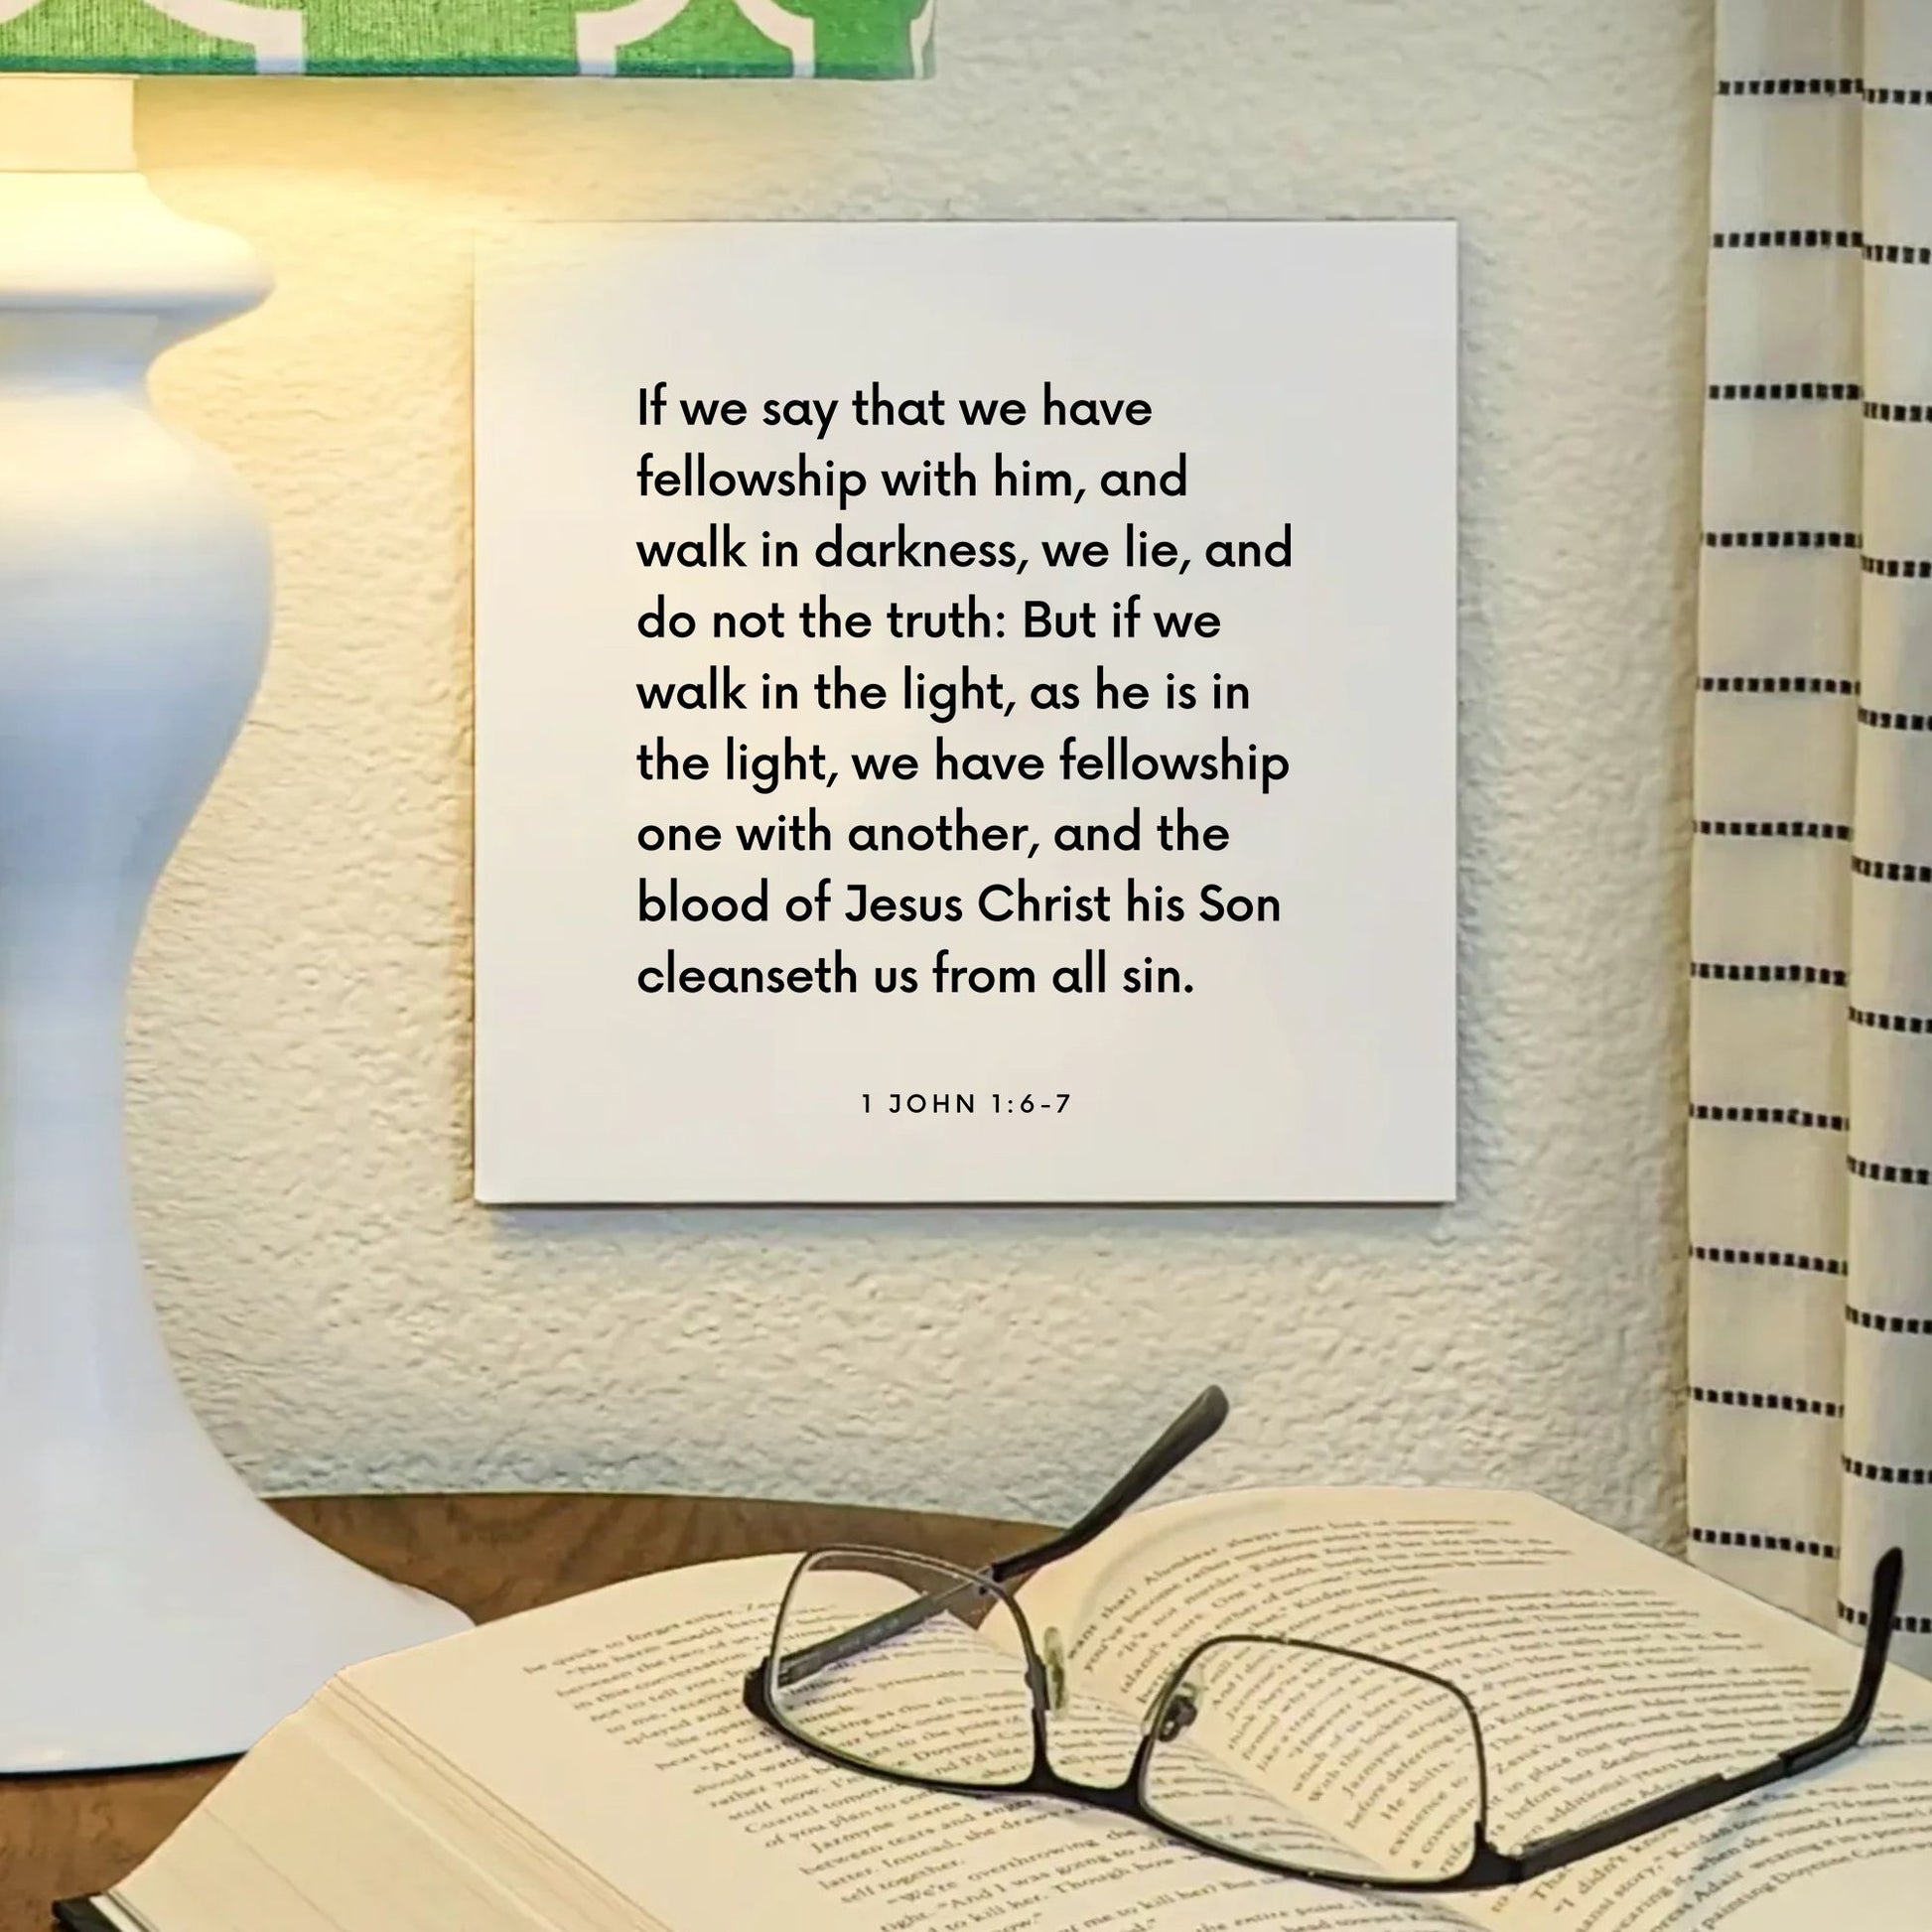 Lamp mouting of the scripture tile for 1 John 1:6-7 - "If we walk in the light, as he is in the light"